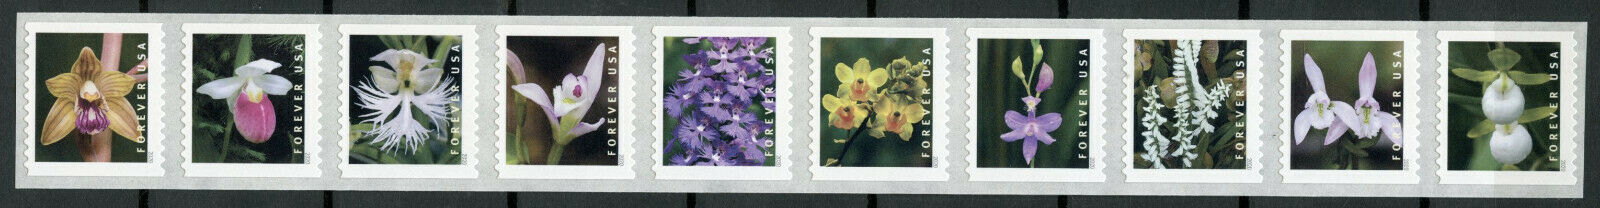 USA Flowers Stamps 2020 MNH Wild Orchids Orchid Flora Nature 10v S/A Coil Set